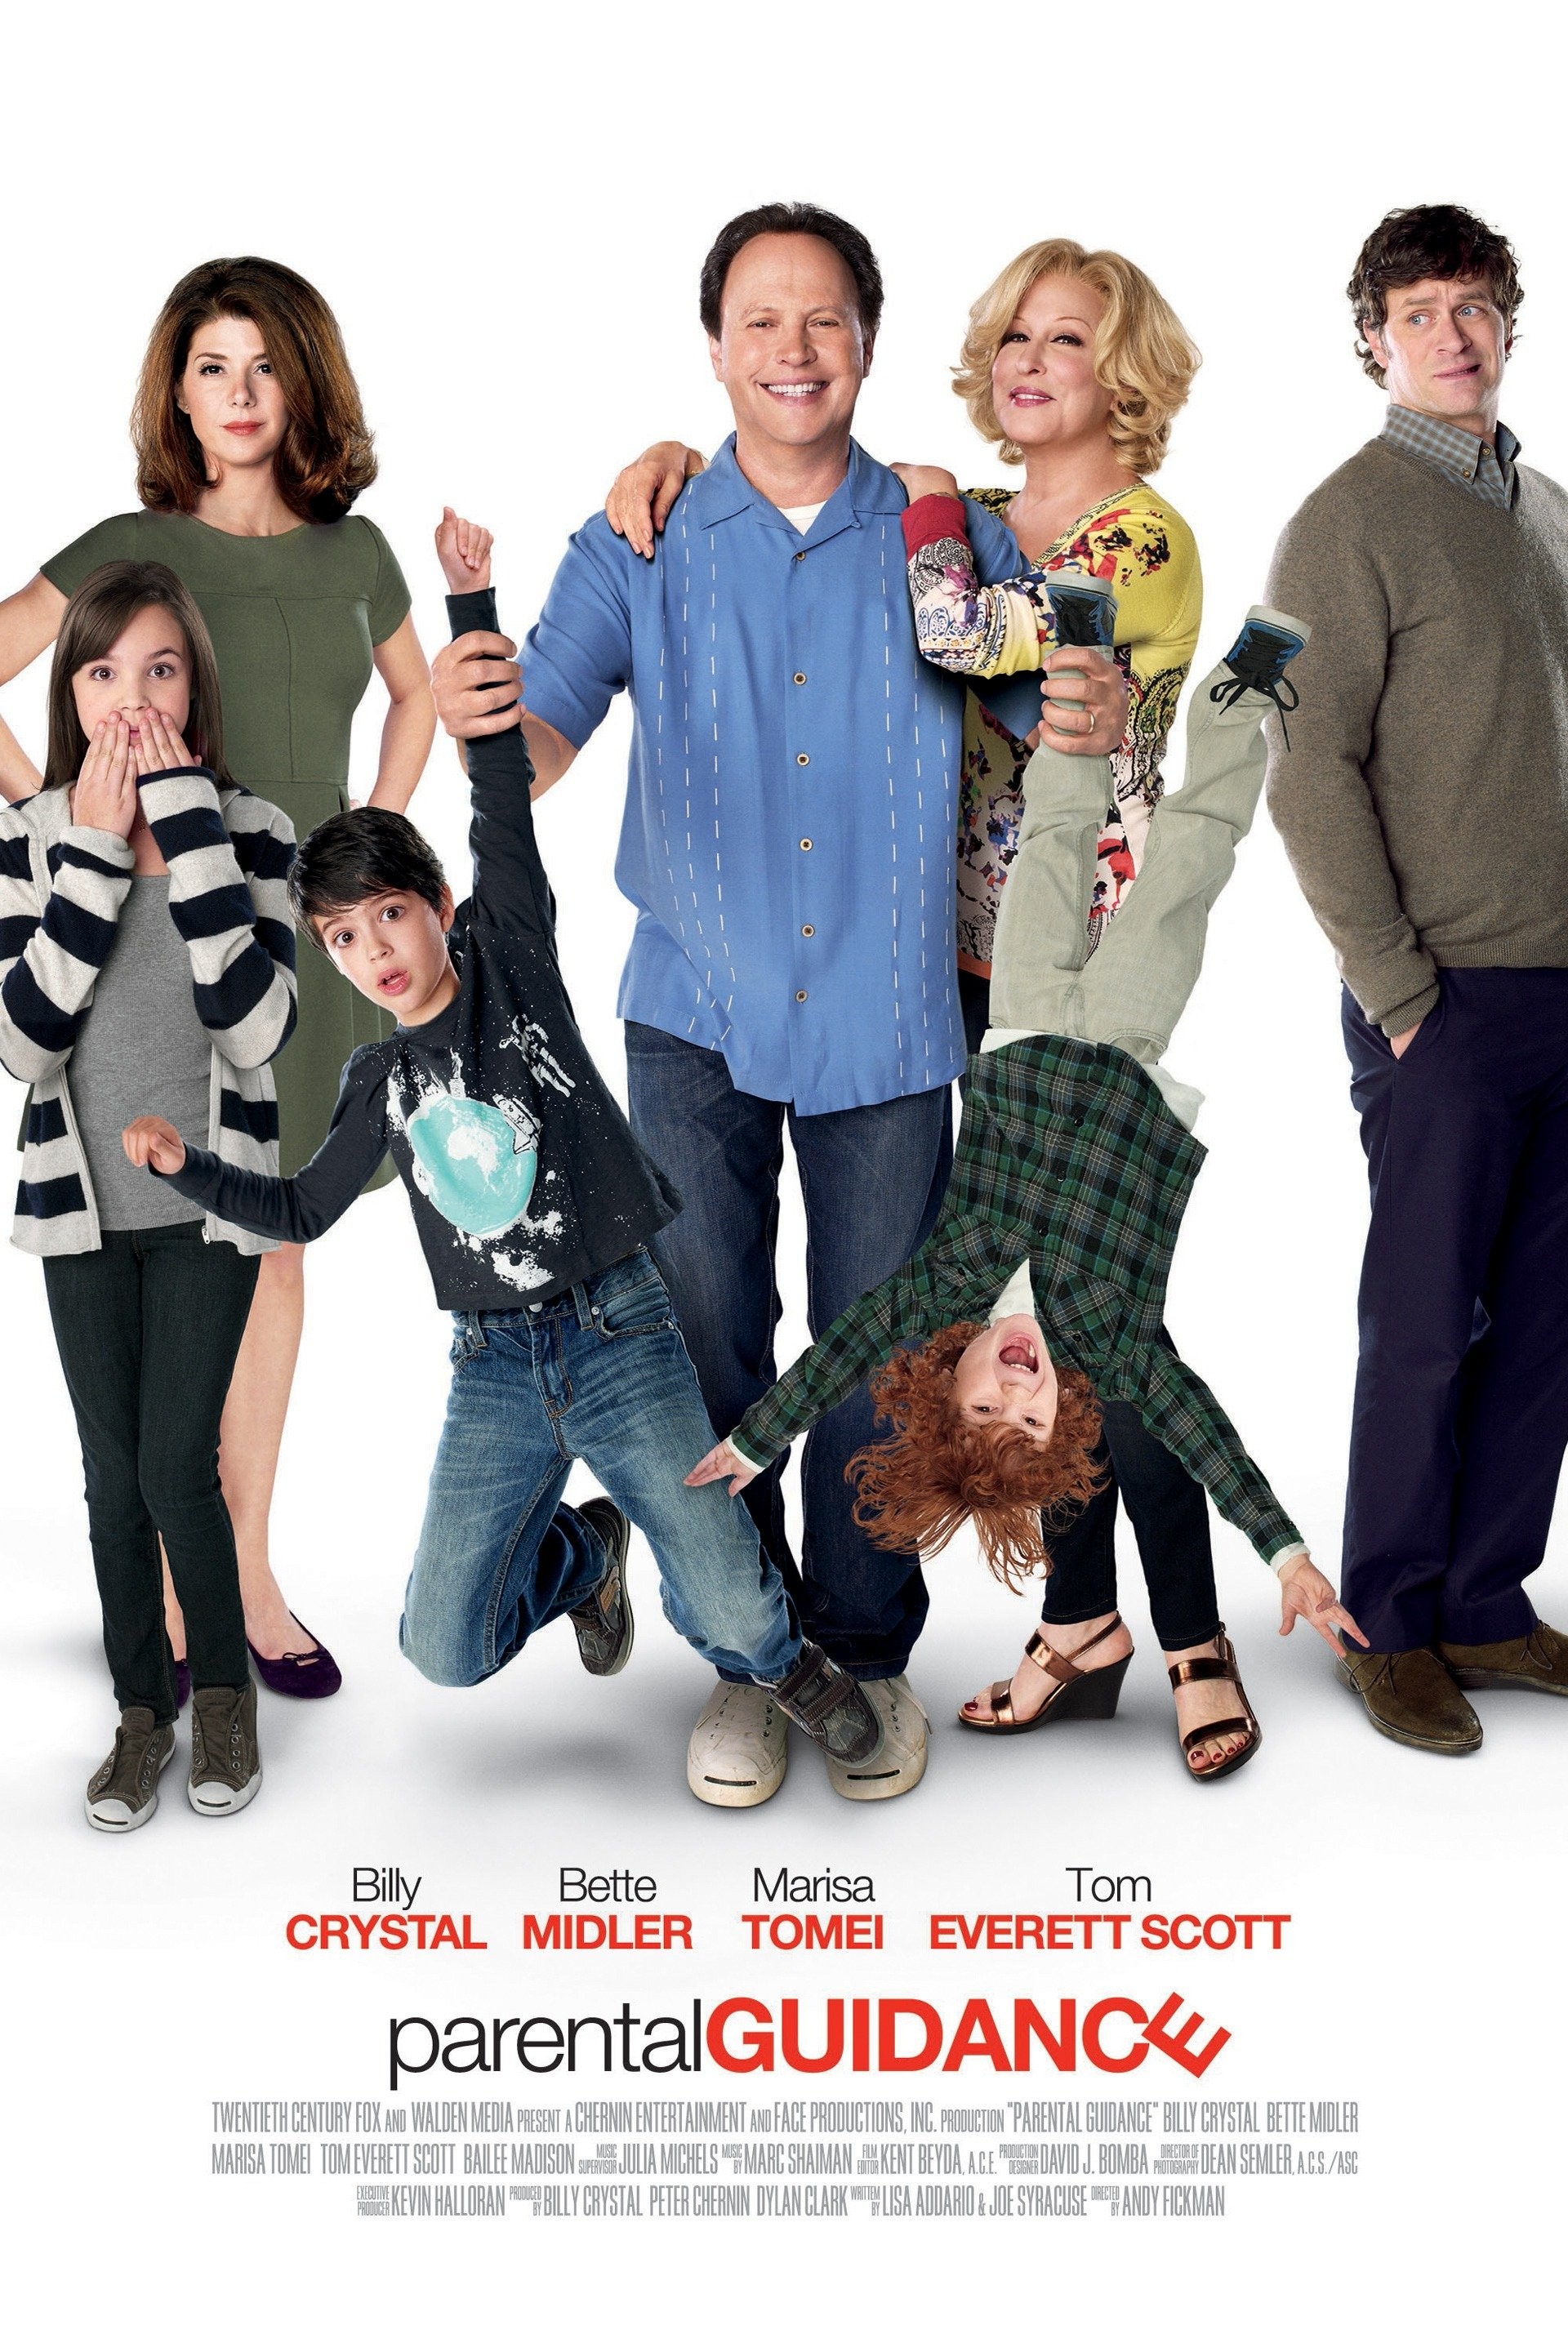 A Feel Good Family Movie, Playing With Fire Brings Laughter & Tears!